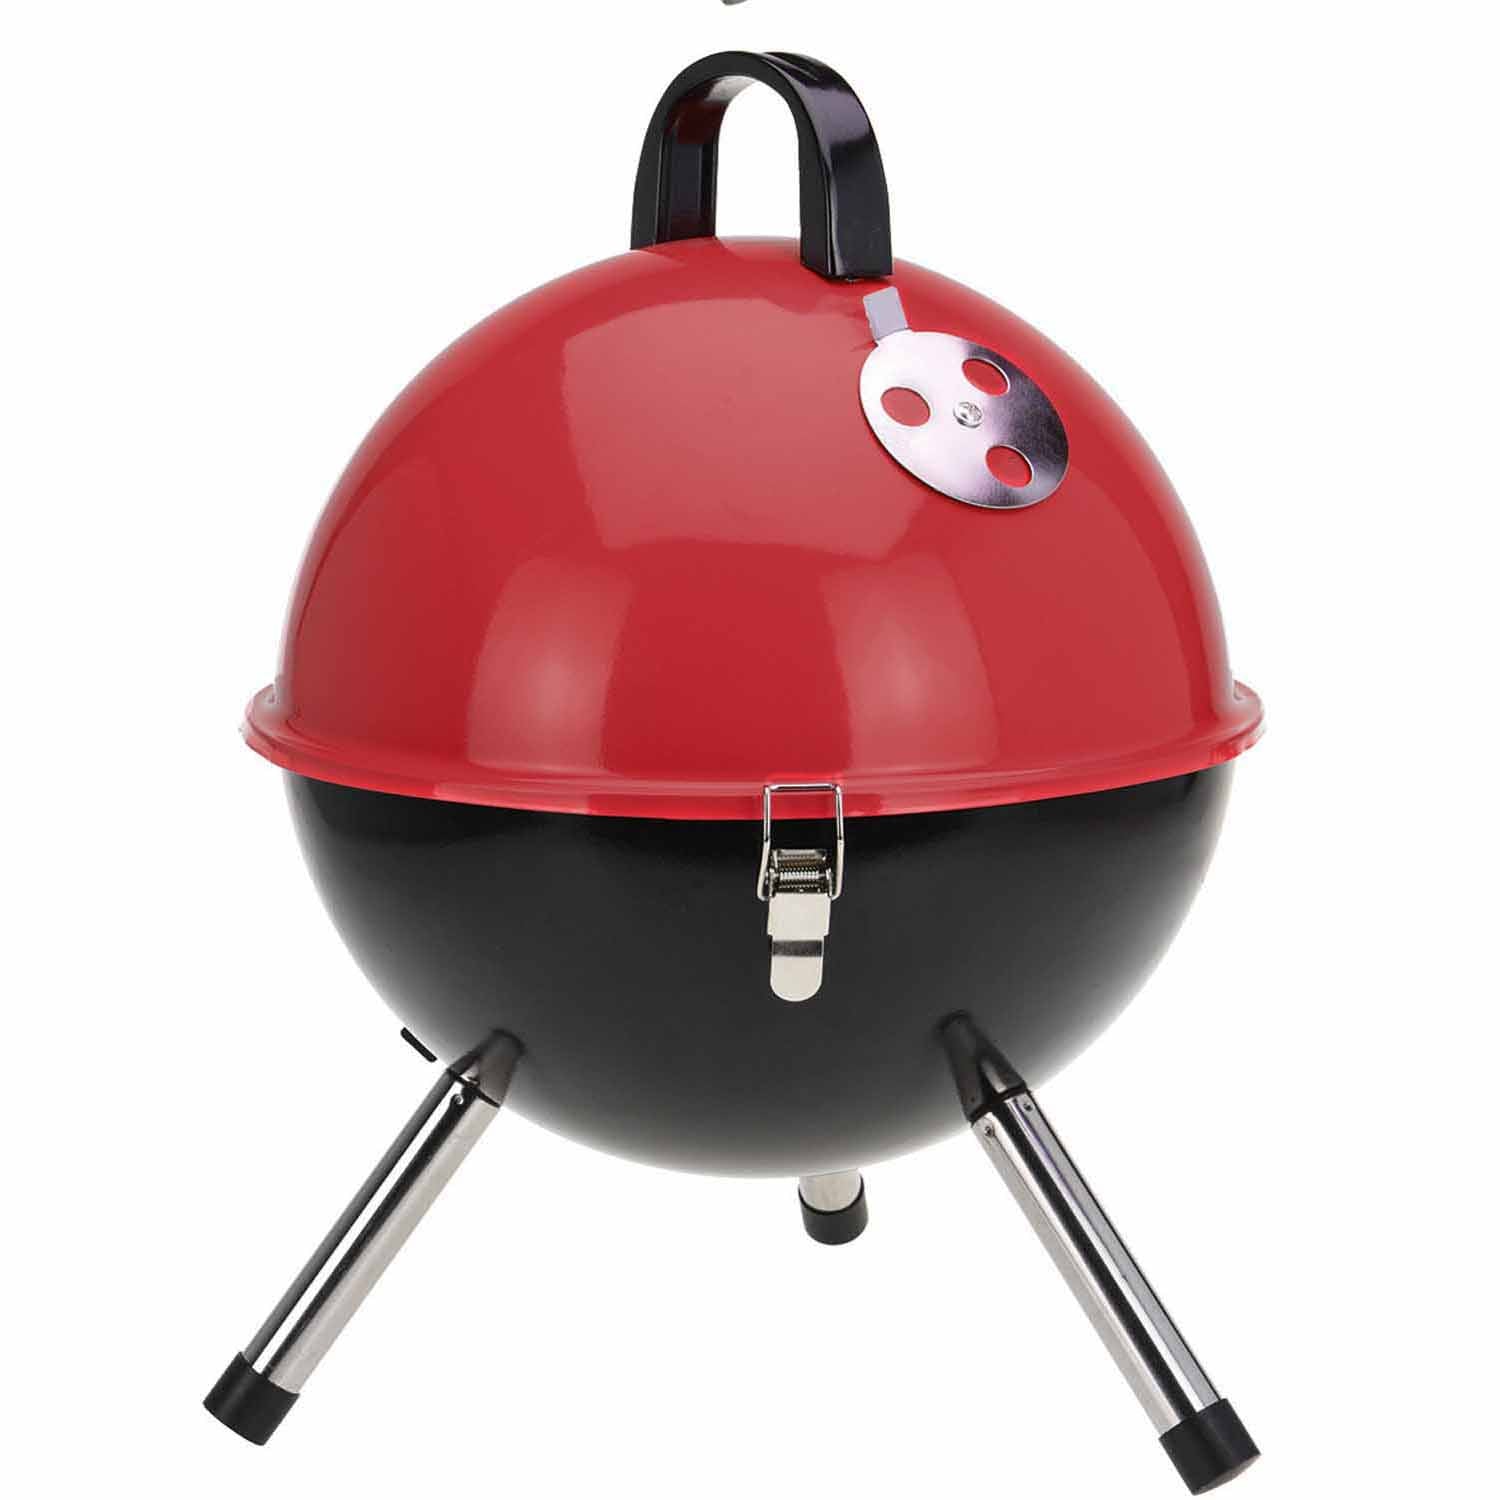 The Home Ball Shaped BBQ 31cm - Red 1 Shaws Department Stores